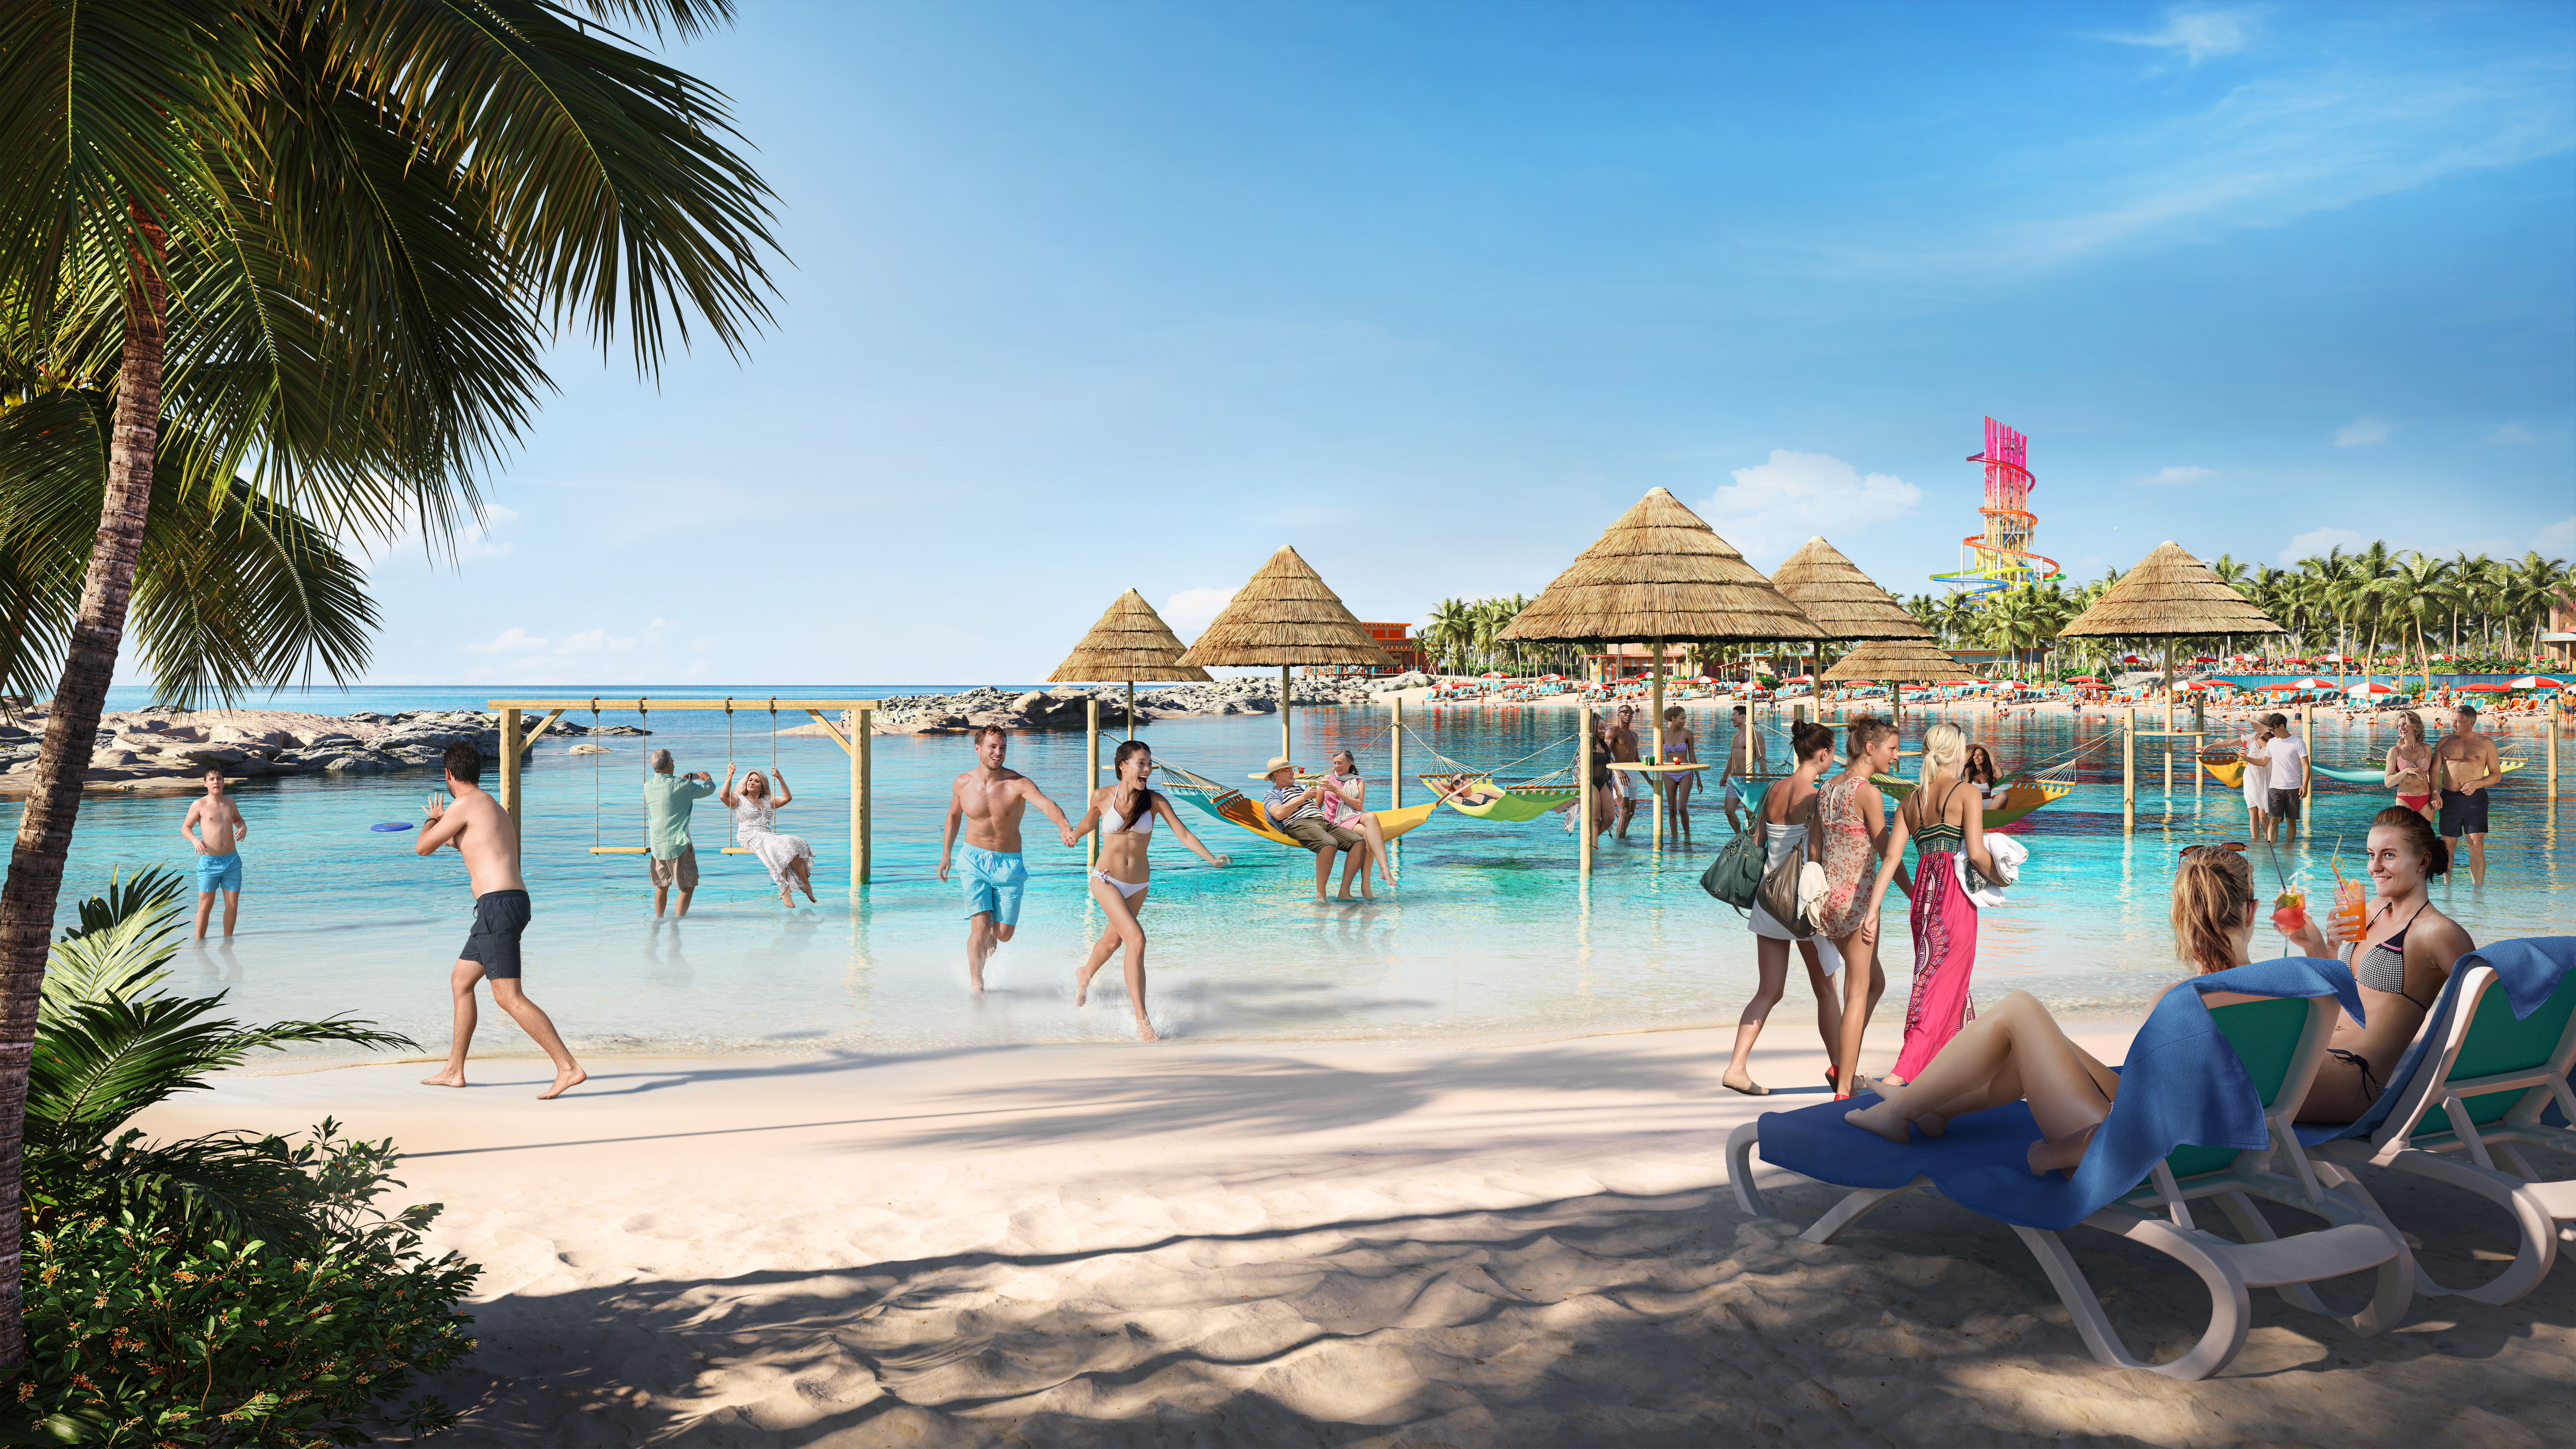 ROYAL CARIBBEAN REVEALS HIDEAWAY BEACH, THE FIRST ADULTS-ONLY